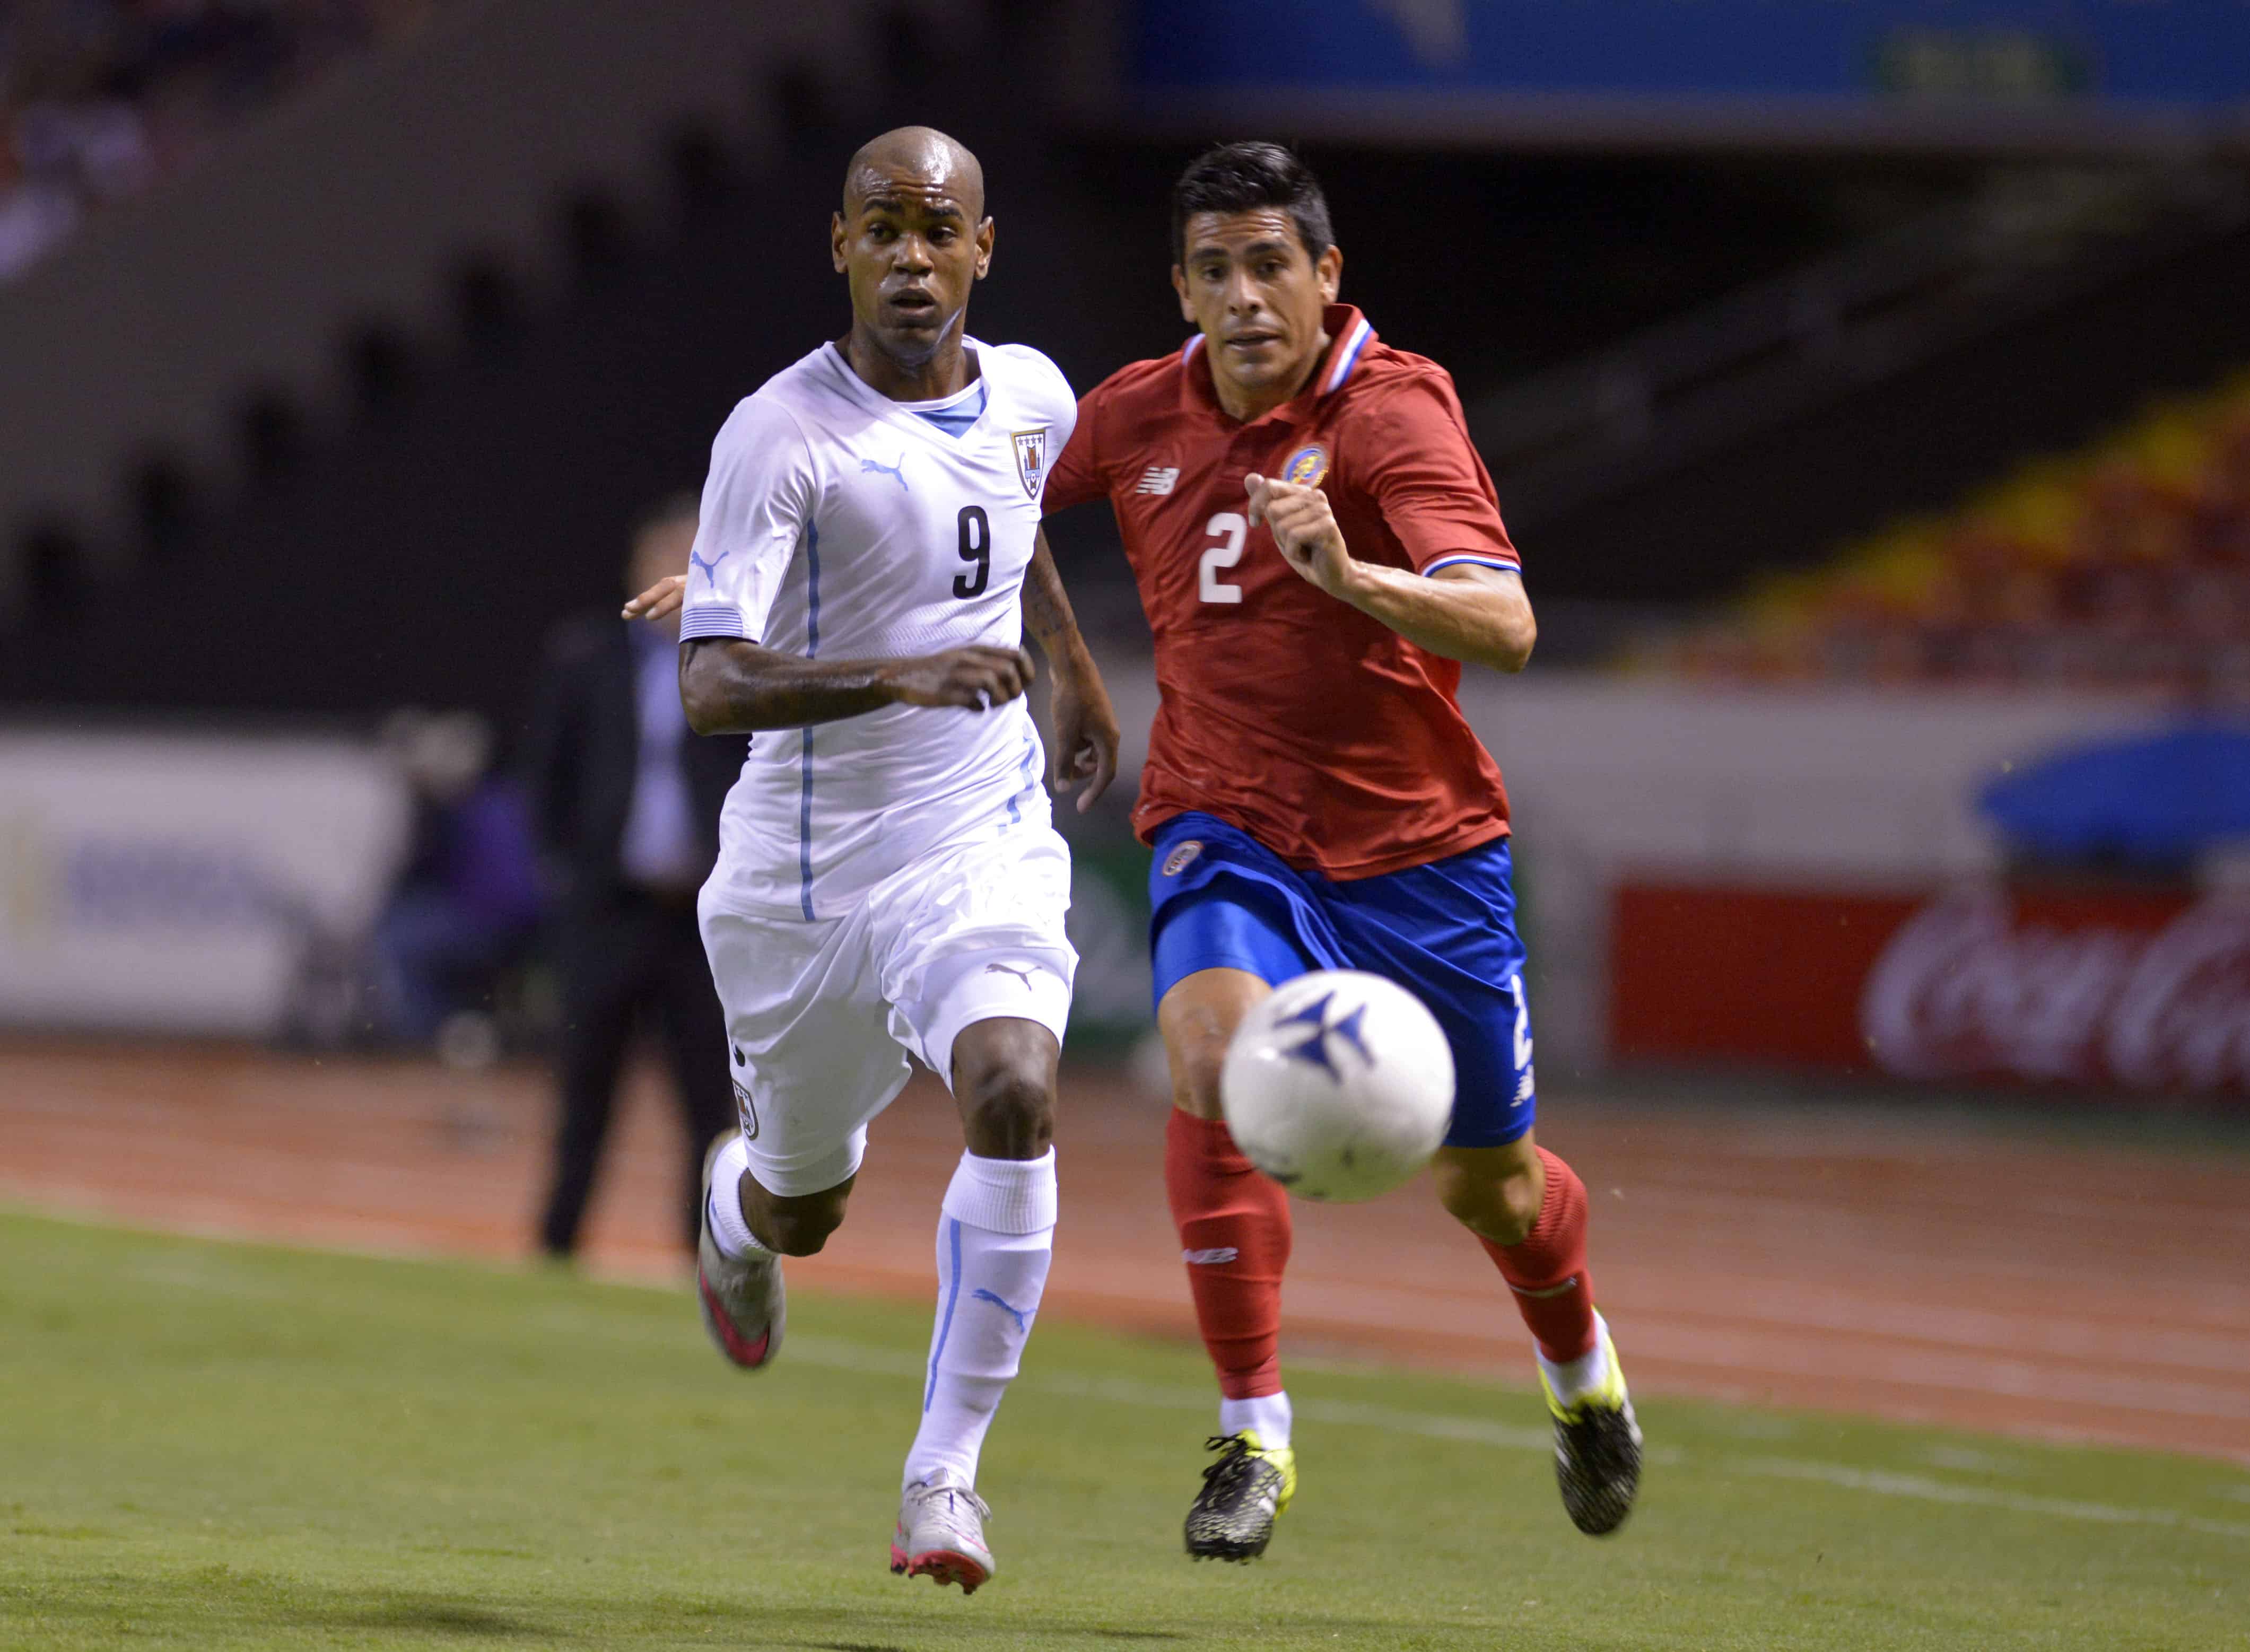 Costa Rica's Johnny Acosta (R) races for the ball with Diego Rolan (L) of Uruguay during La Sele's 1-0 win at the National Stadium in San Jose, Costa Rica, on Sept. 8, 2015.